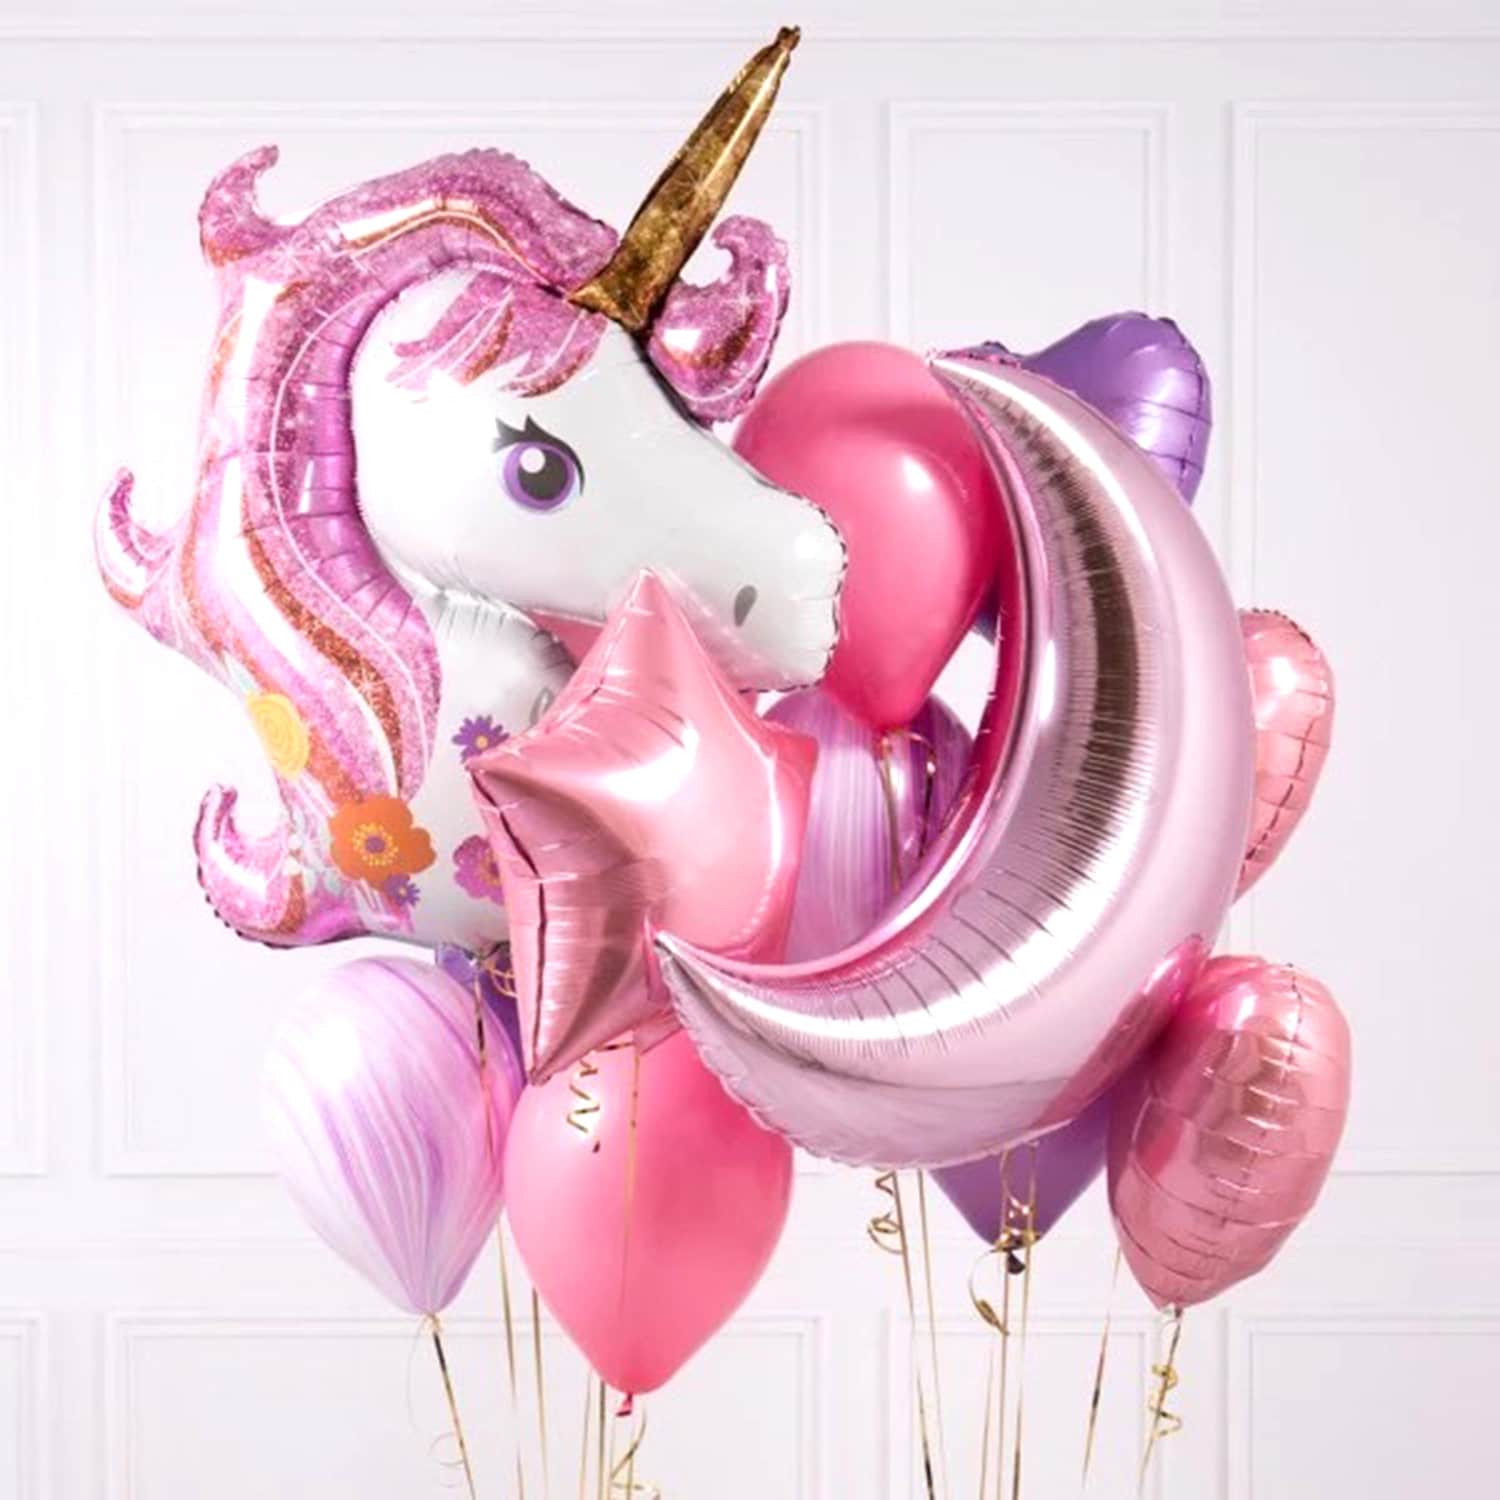 Unicorn 4th Birthday Party Decorations for Girl Purple Pink Unicorn Party  Theme Balloon Set, Large Rainbow Unicorn Helium Balloons with Heart and  Star